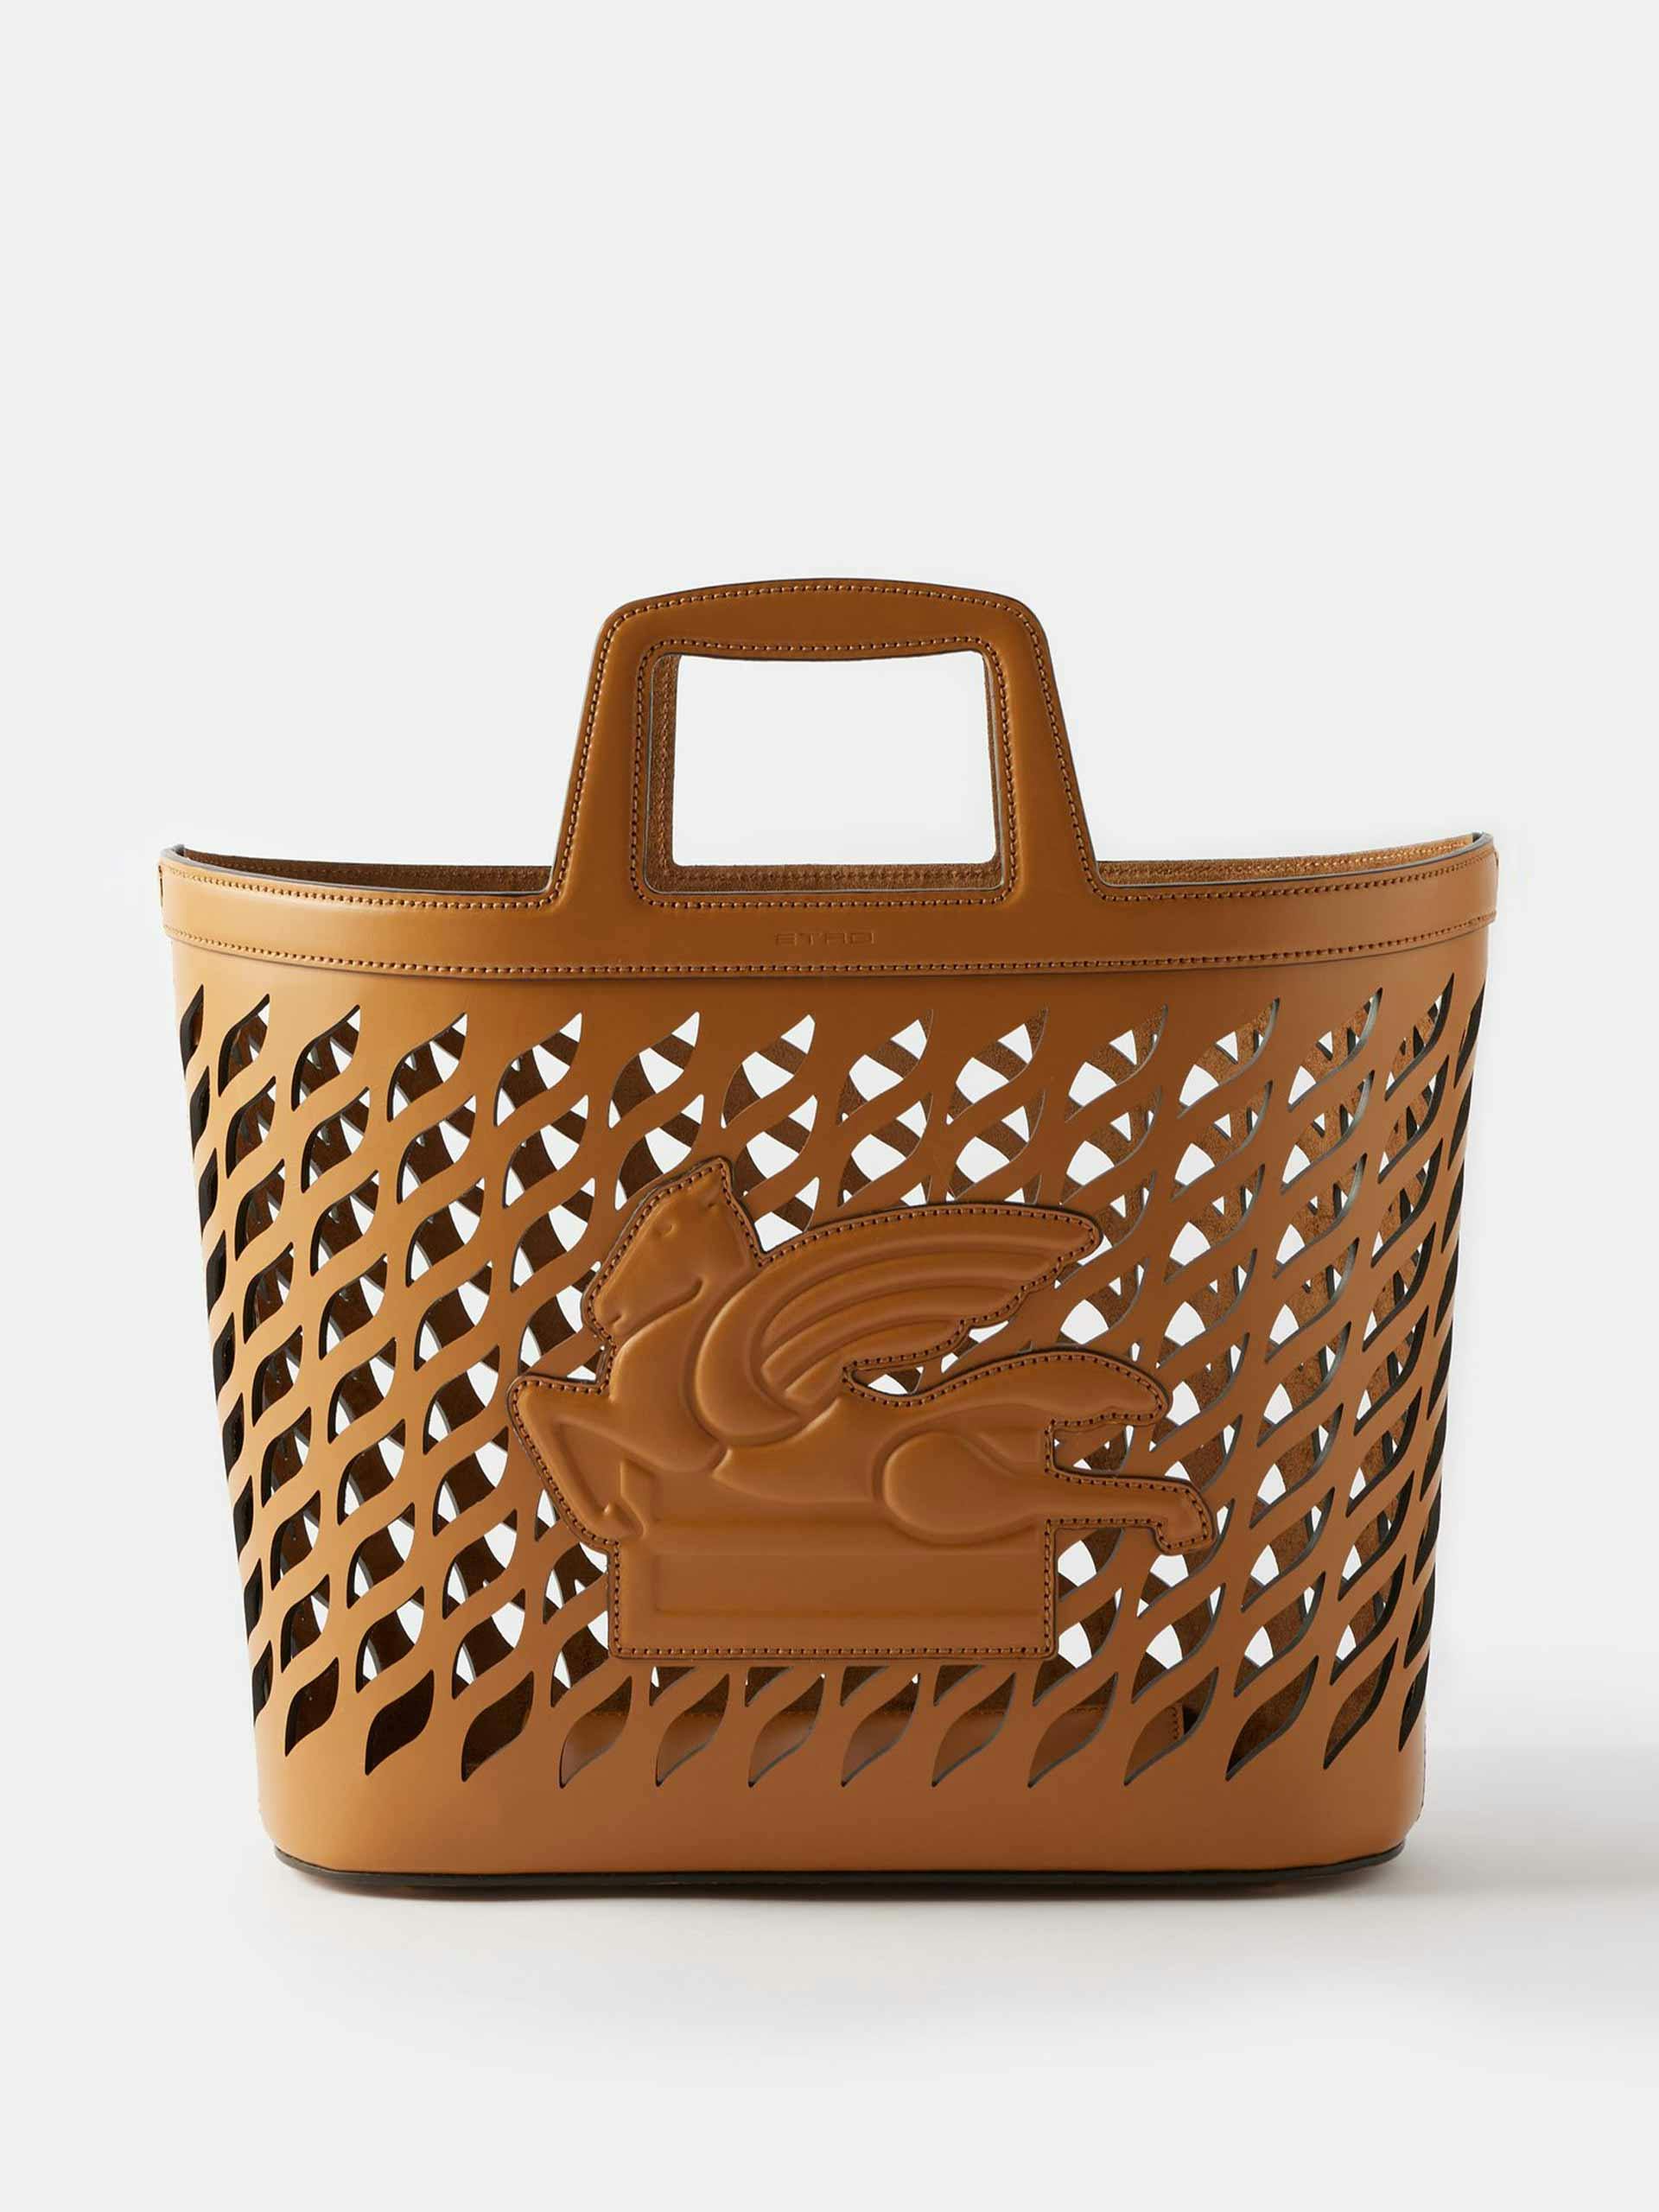 Laser-cut leather tote bag